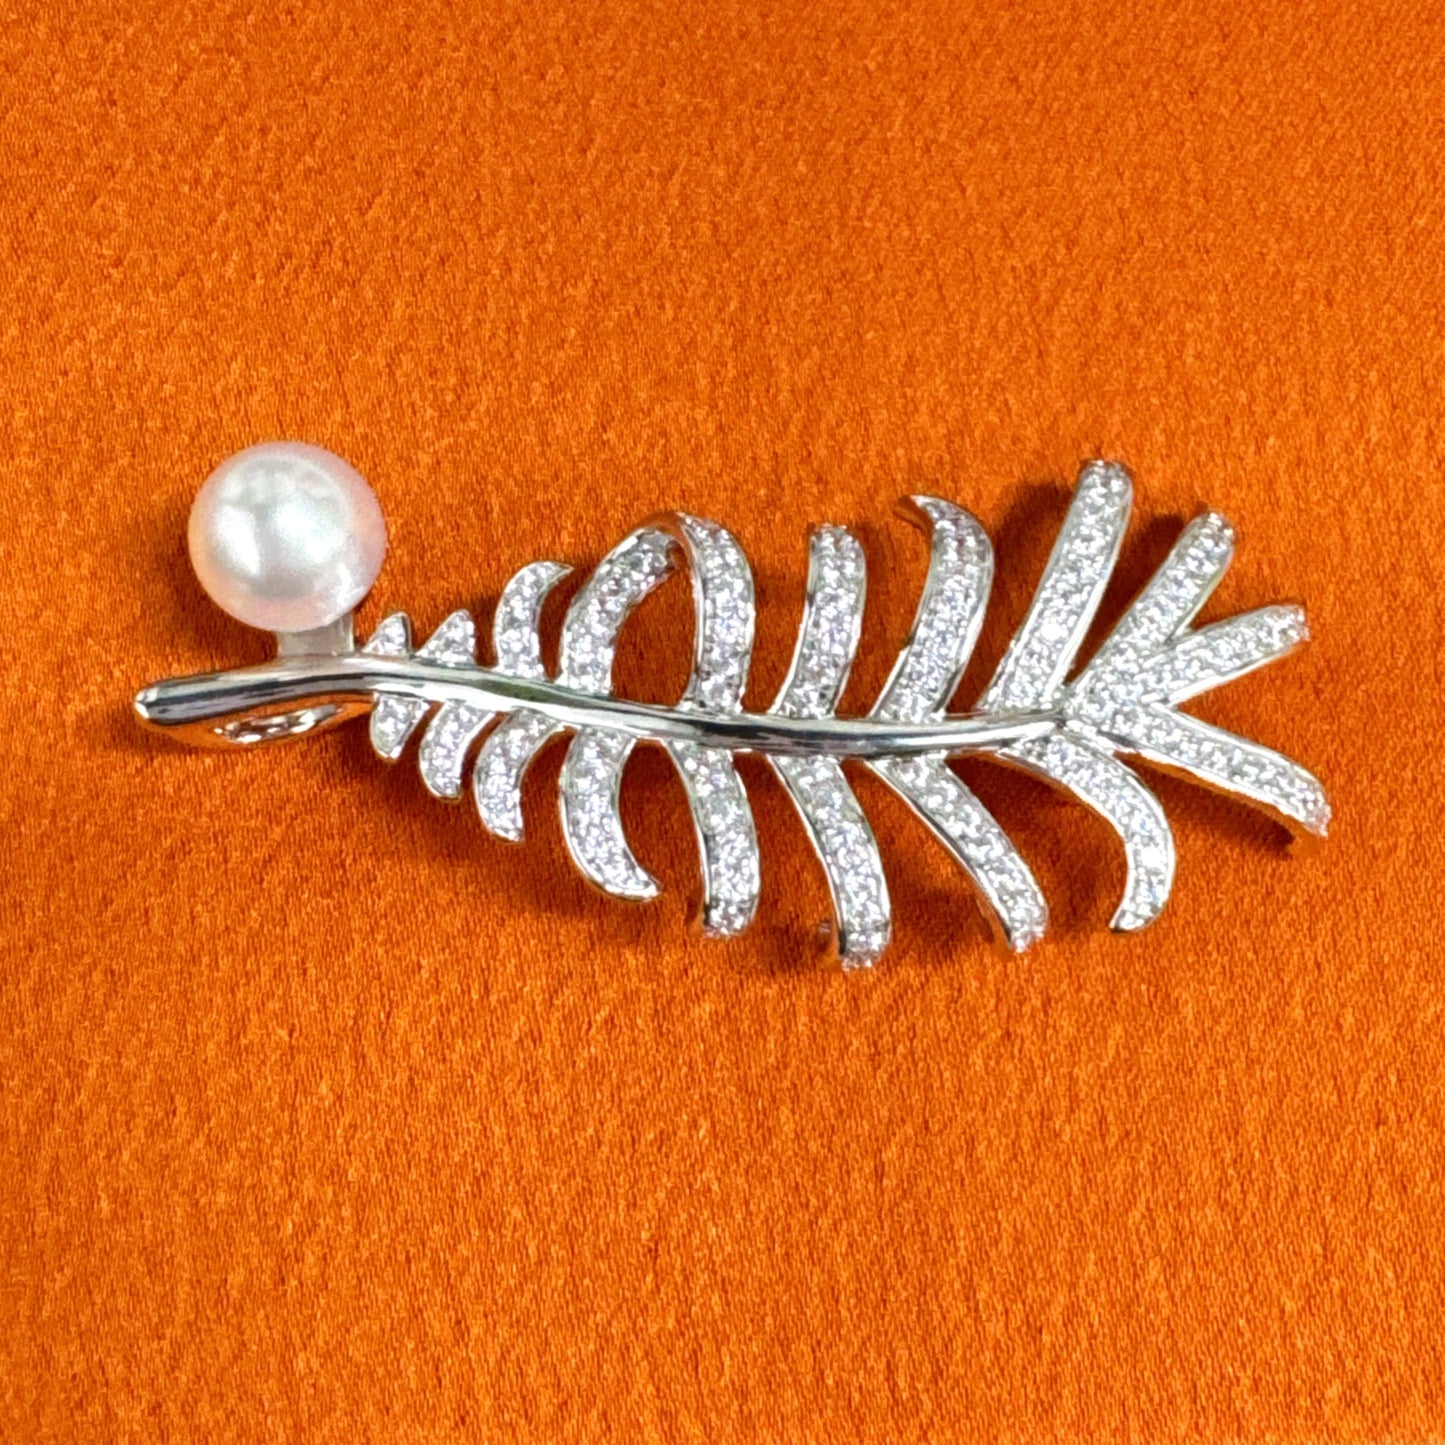 Handmade feather pearl brooch, women's brooches pins, jewelry ring, mother's day gifts, dress accessories,silver feathers broaches crafts